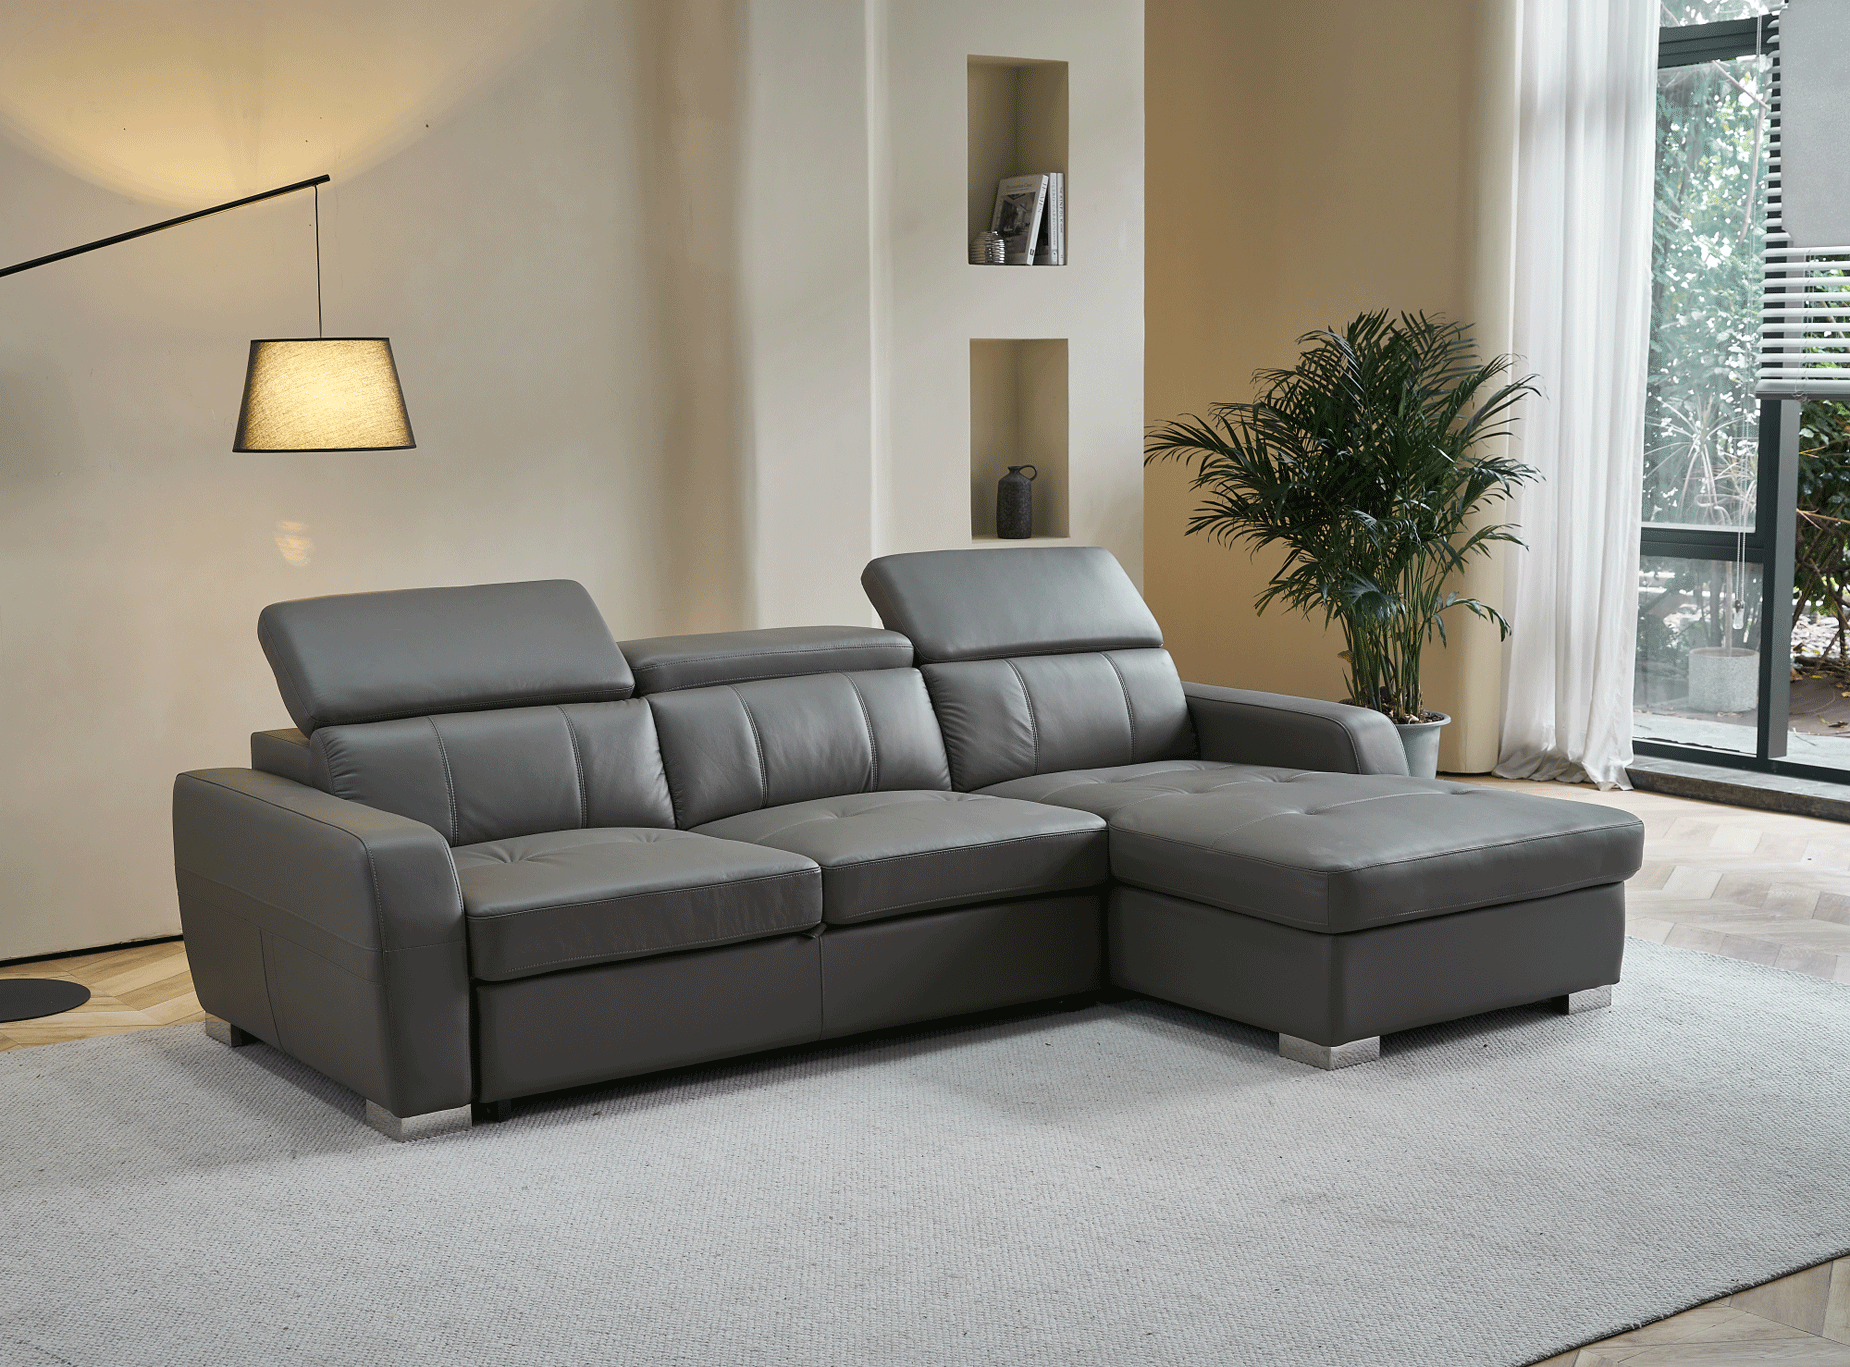 Brands ALF Capri Coffee Tables, Italy 1822 GREY Sectional Right w/Bed